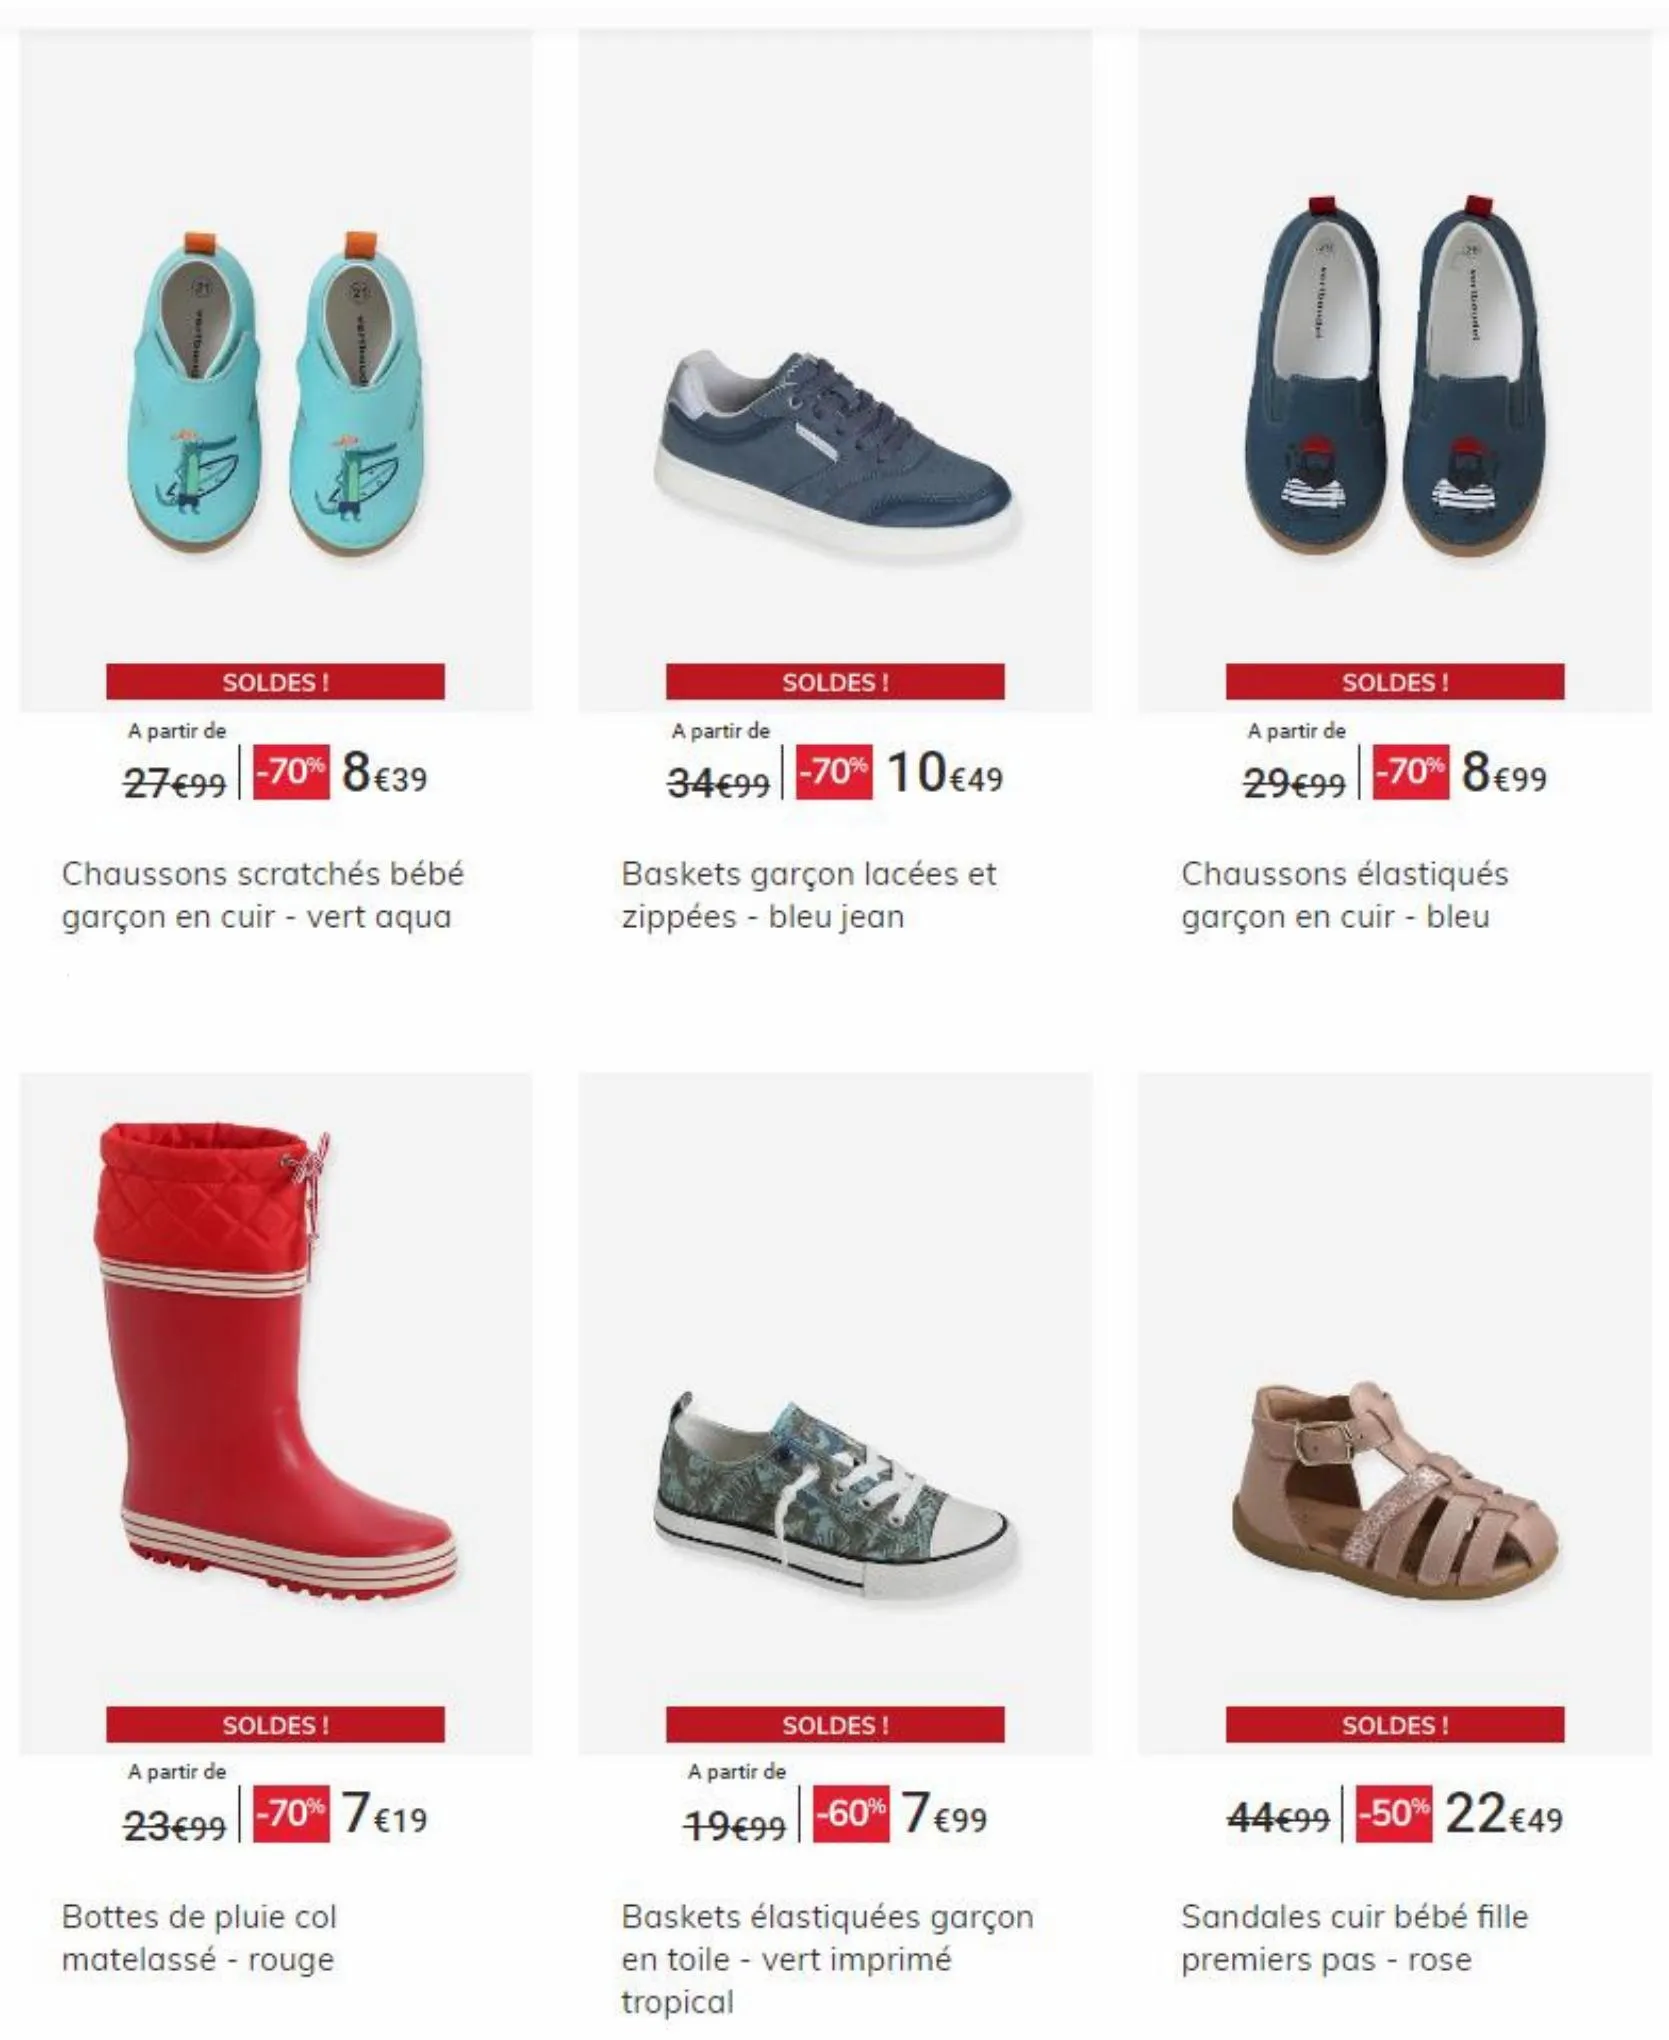 Catalogue SOLDES -70% CHAUSSURES, page 00006